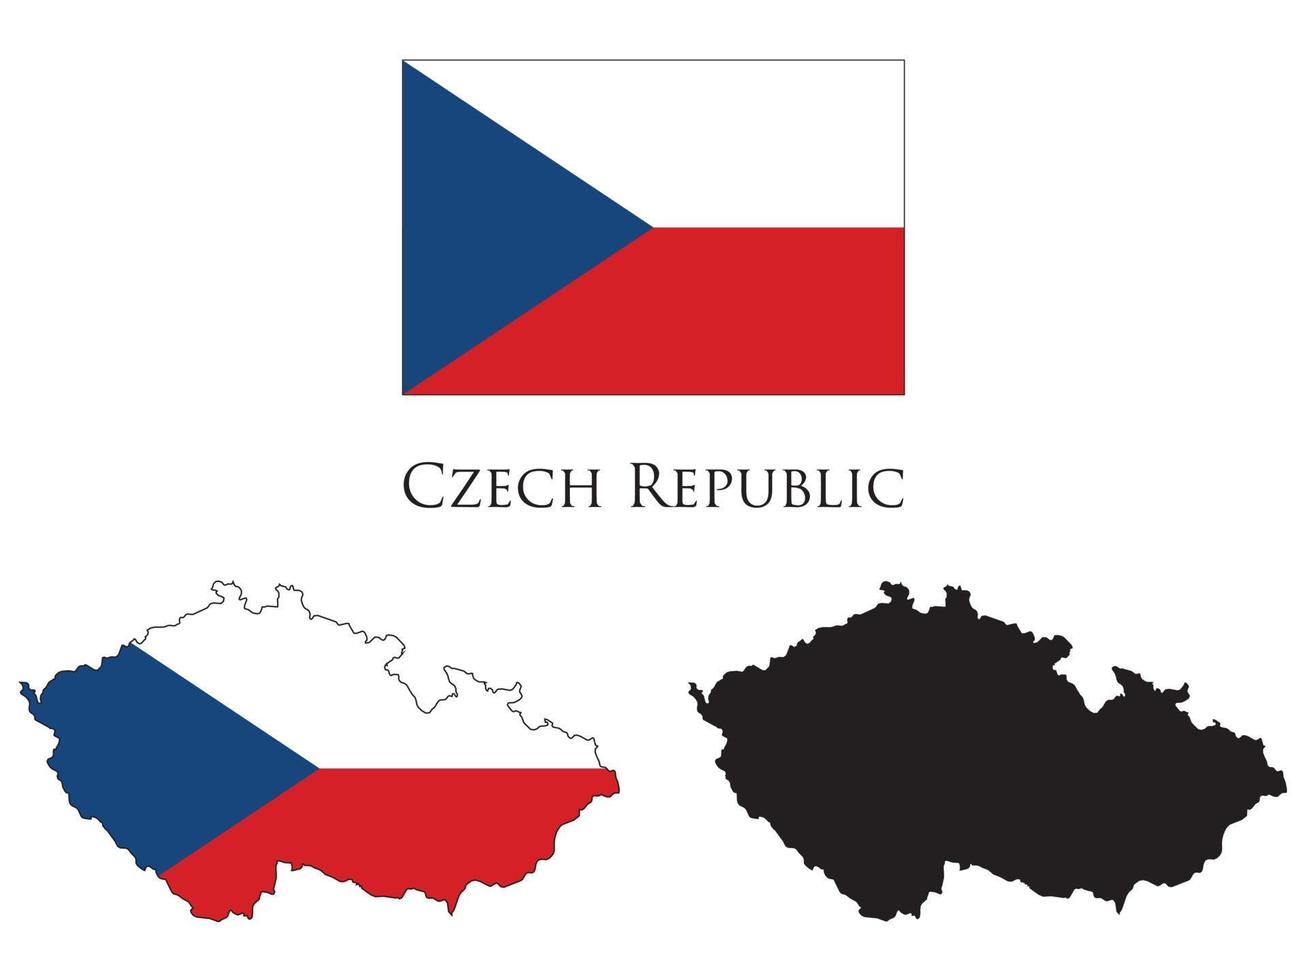 CZECH REPUBLIC flag and map illustration vector